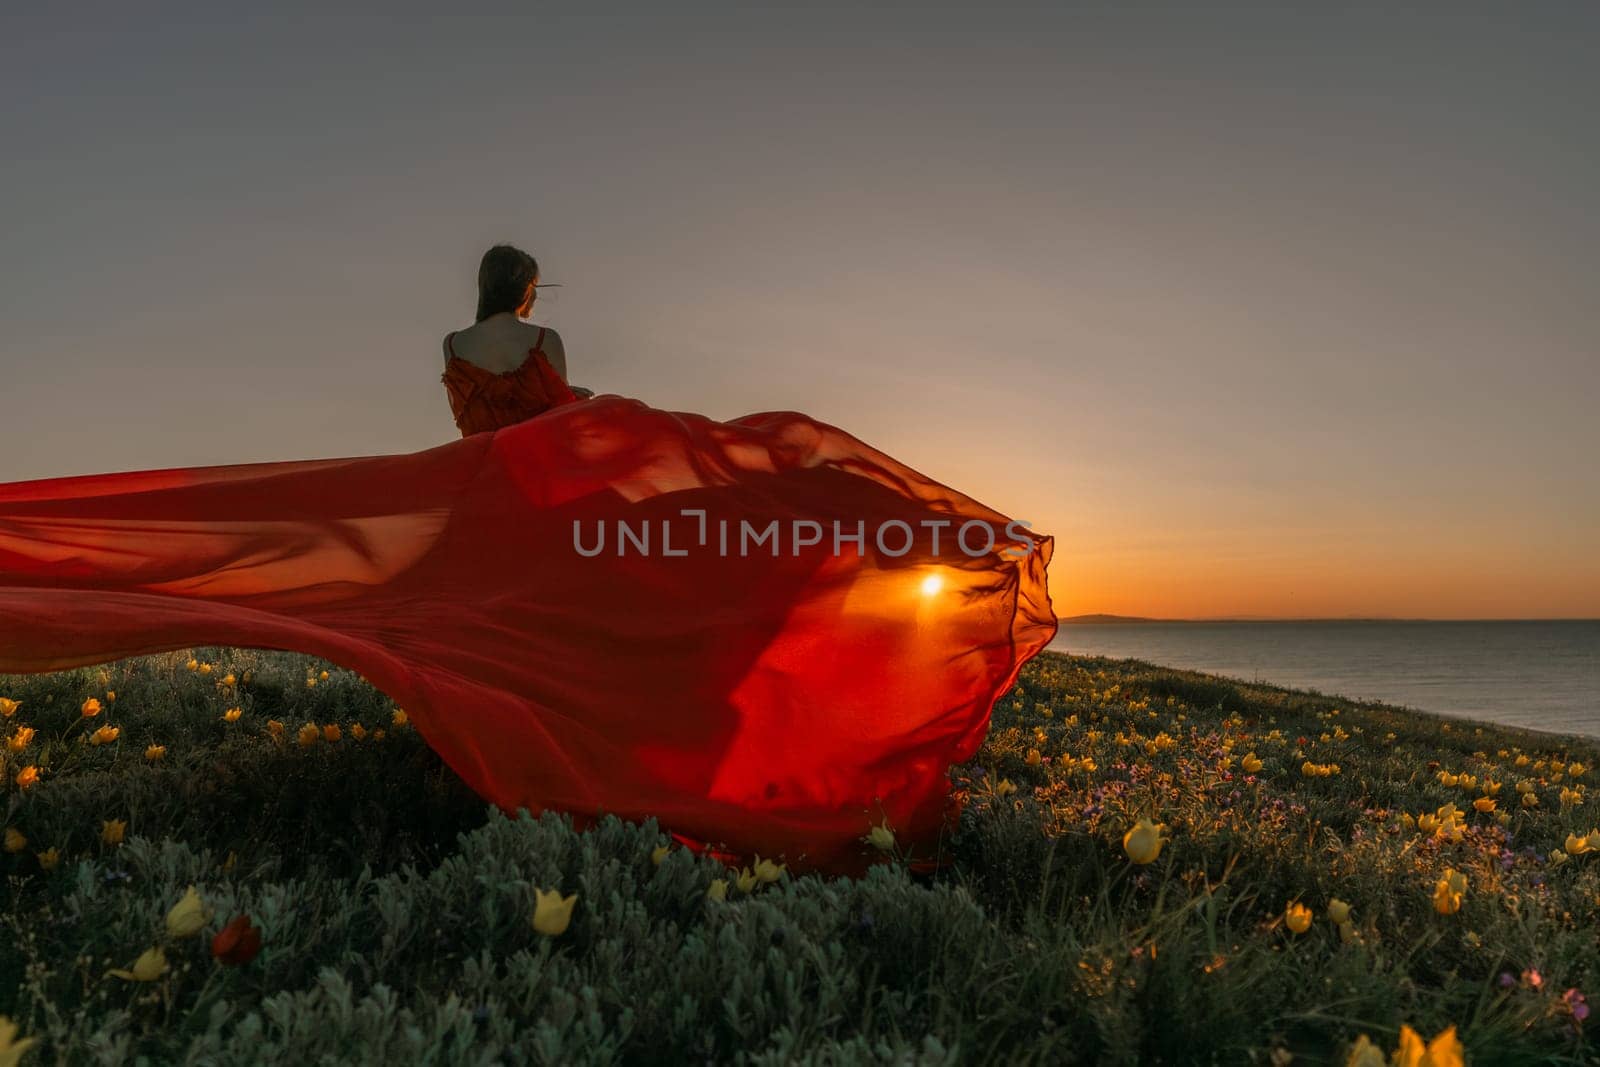 A woman in a red dress is standing in a field with the sun setting behind her. She is reaching up with her arms outstretched, as if she is trying to catch the sun. The scene is serene and peaceful. by Matiunina